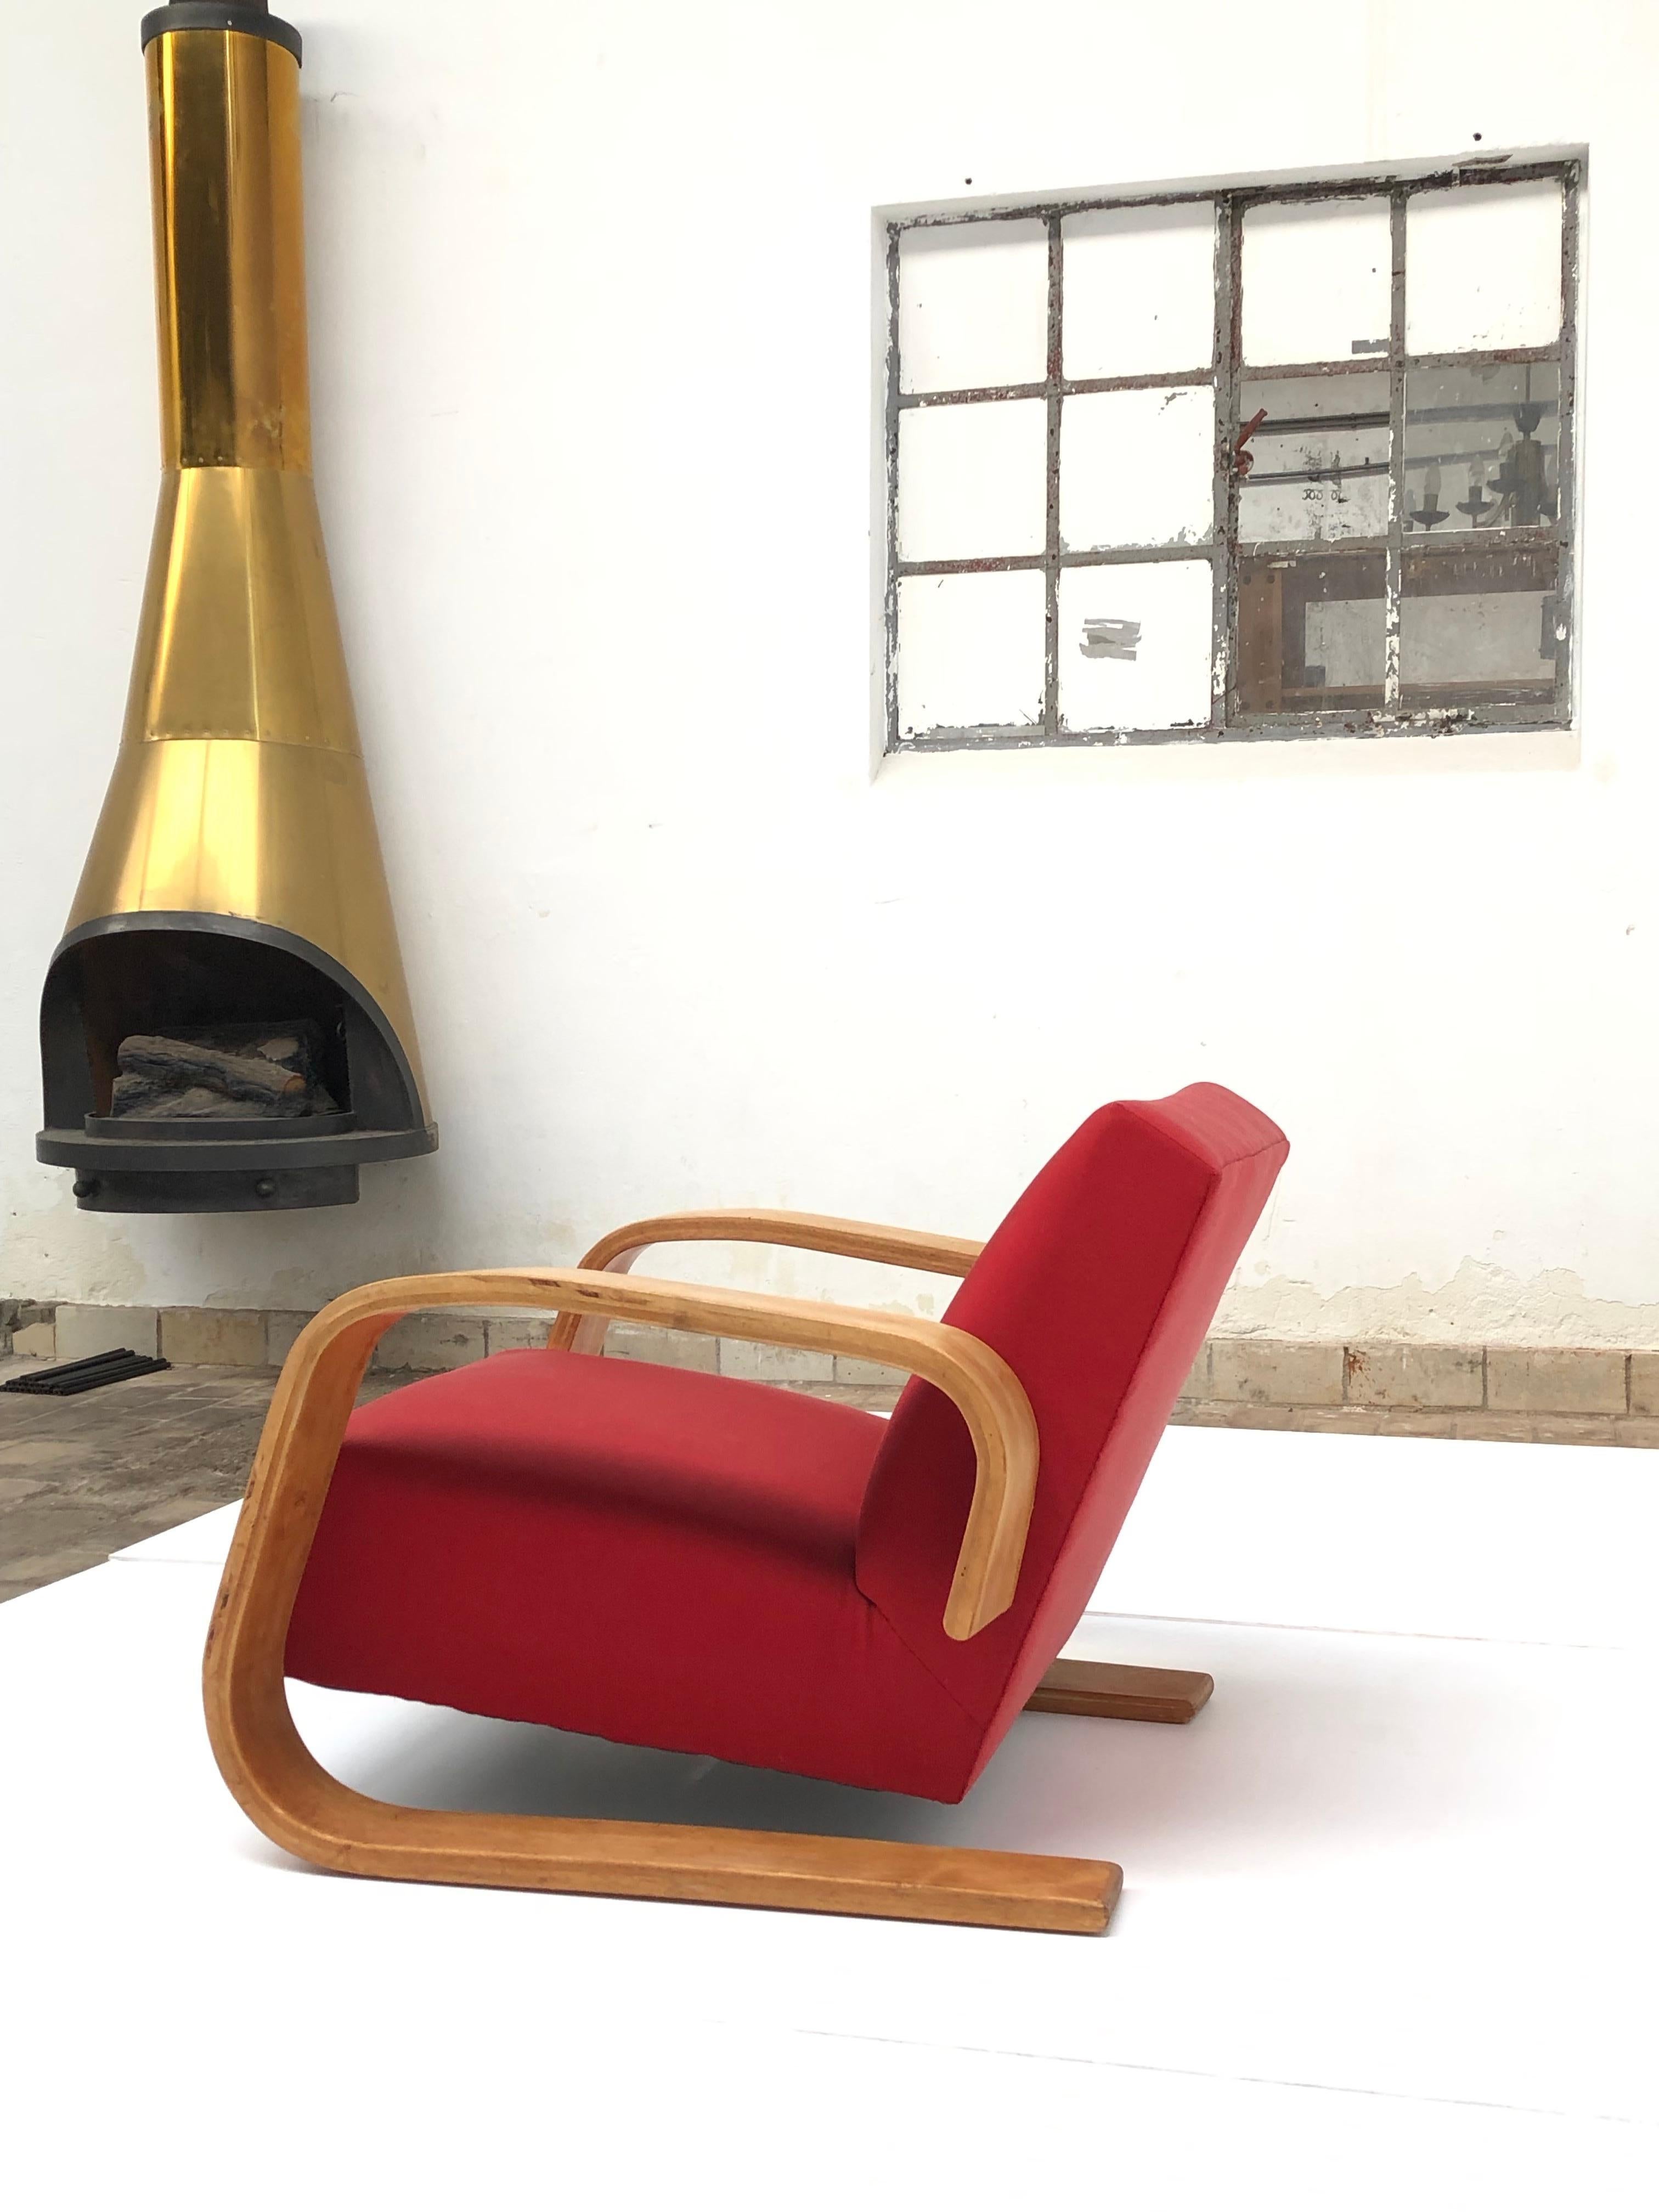 Rare early production with original red upholstery model 400 'TANK' lounge chair designed by Alvar Aalto in 1936 and produced by Artek in Hedemora, Sweden between 1946-1956

As voluminous as it is comfortable, Armchair 400 was created by Alvar Aalto